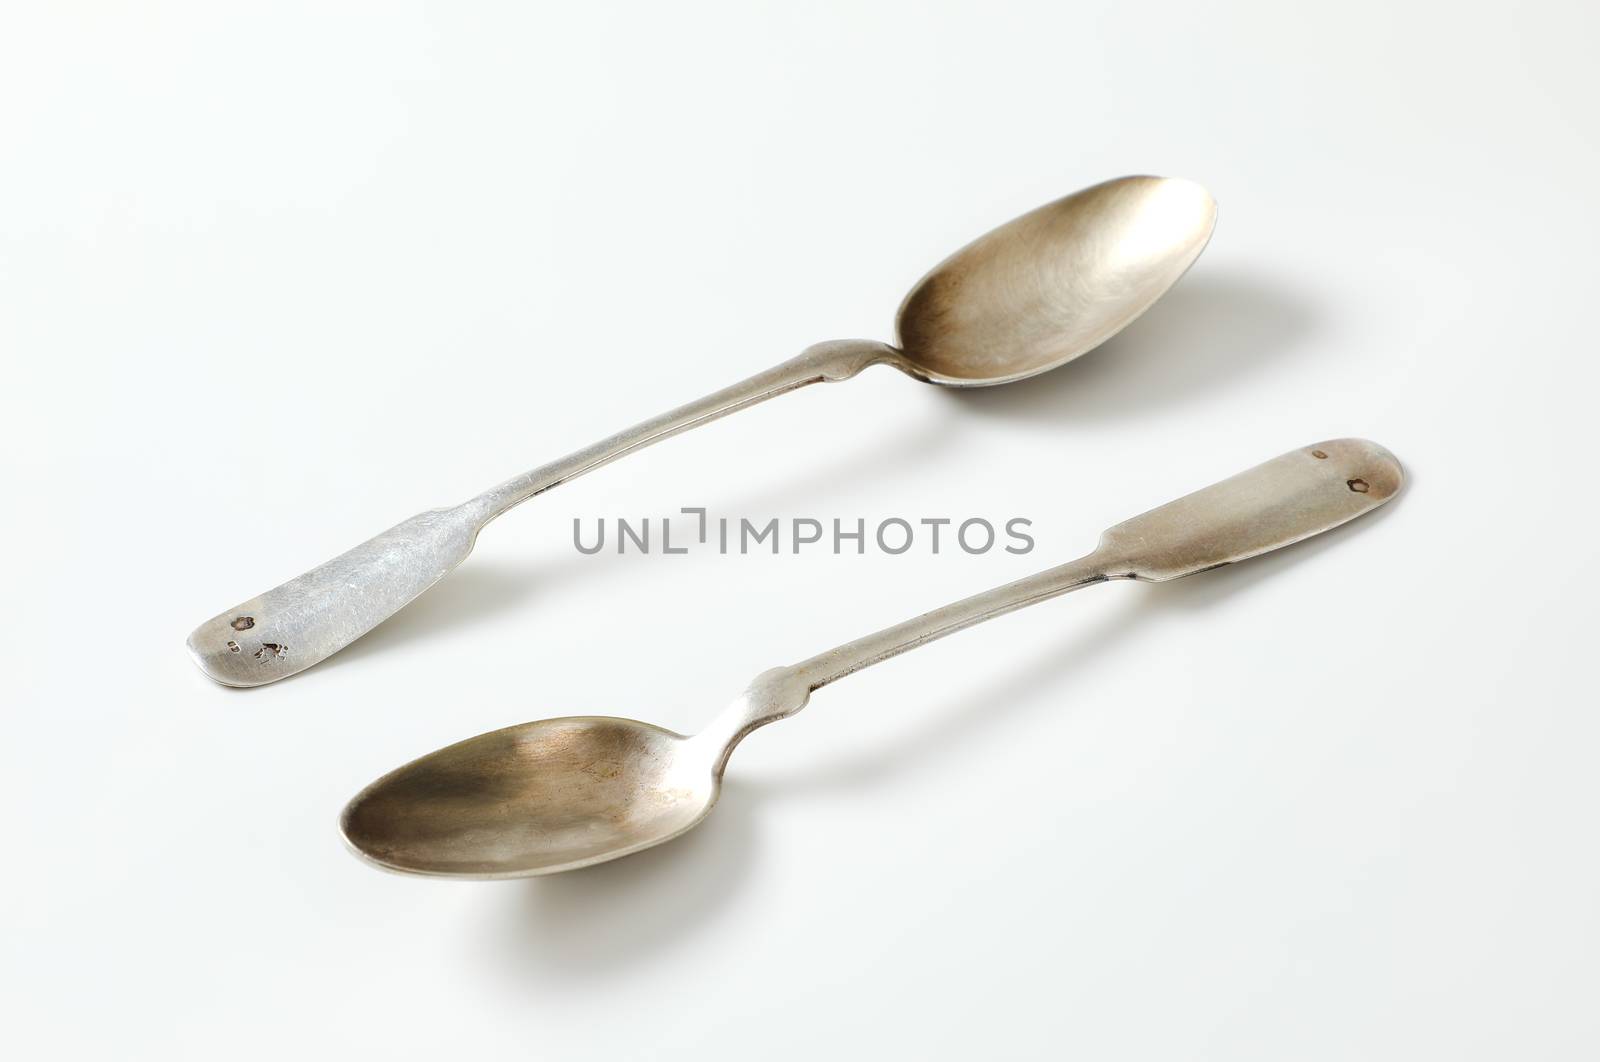 Small vintage coffee or dessert spoons by Digifoodstock